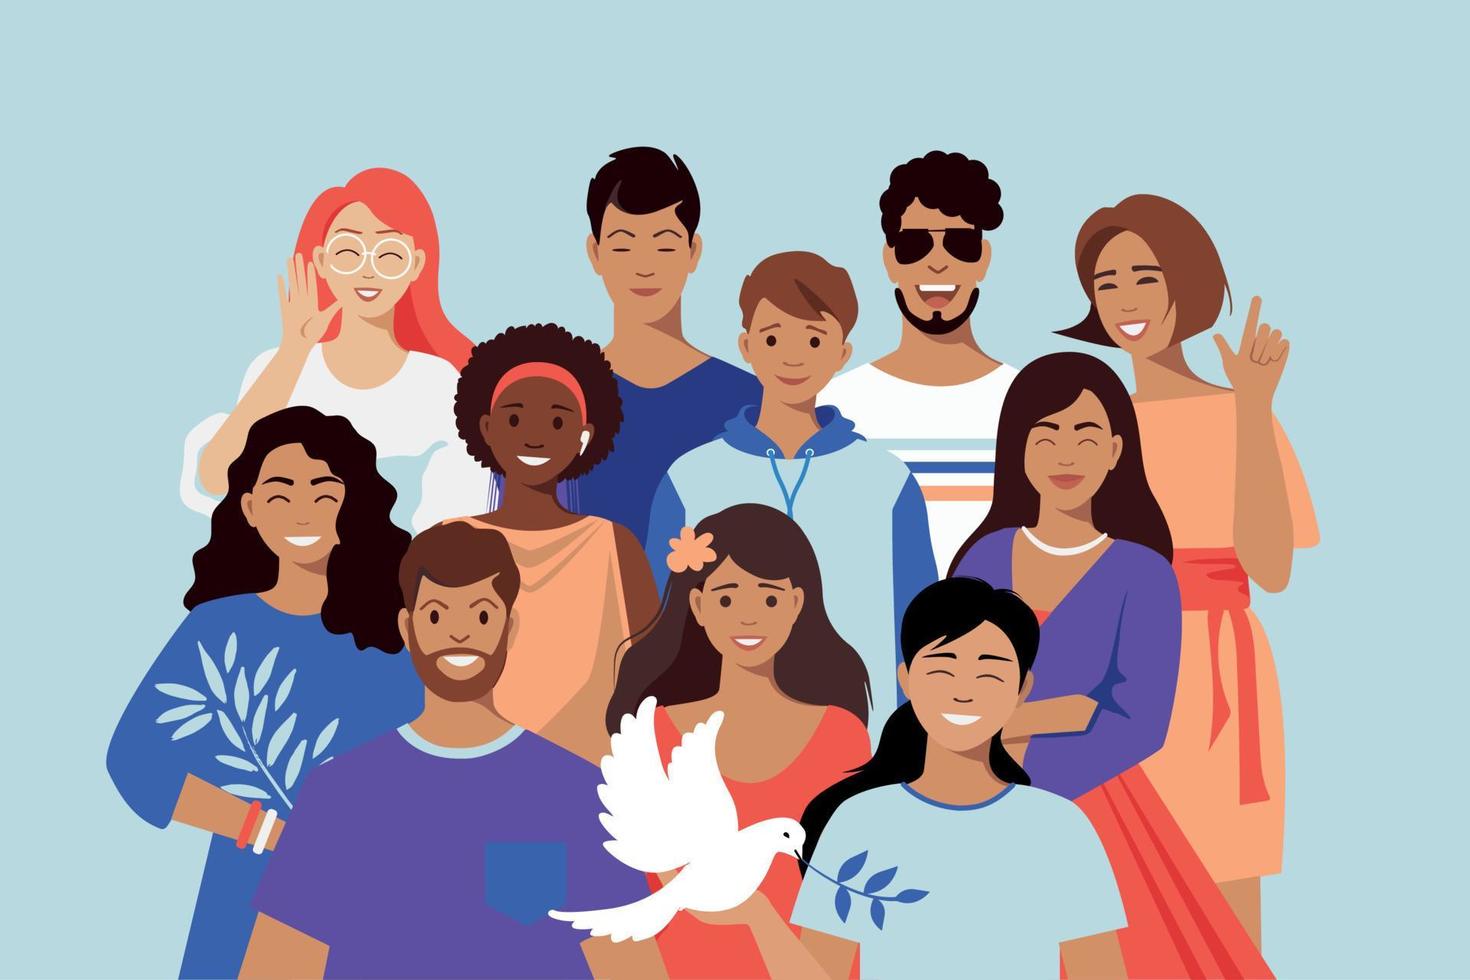 Multicultural team, friends. The dove is a symbol of peace. Unity in diversity. People of different nationalities. multinational society. vector